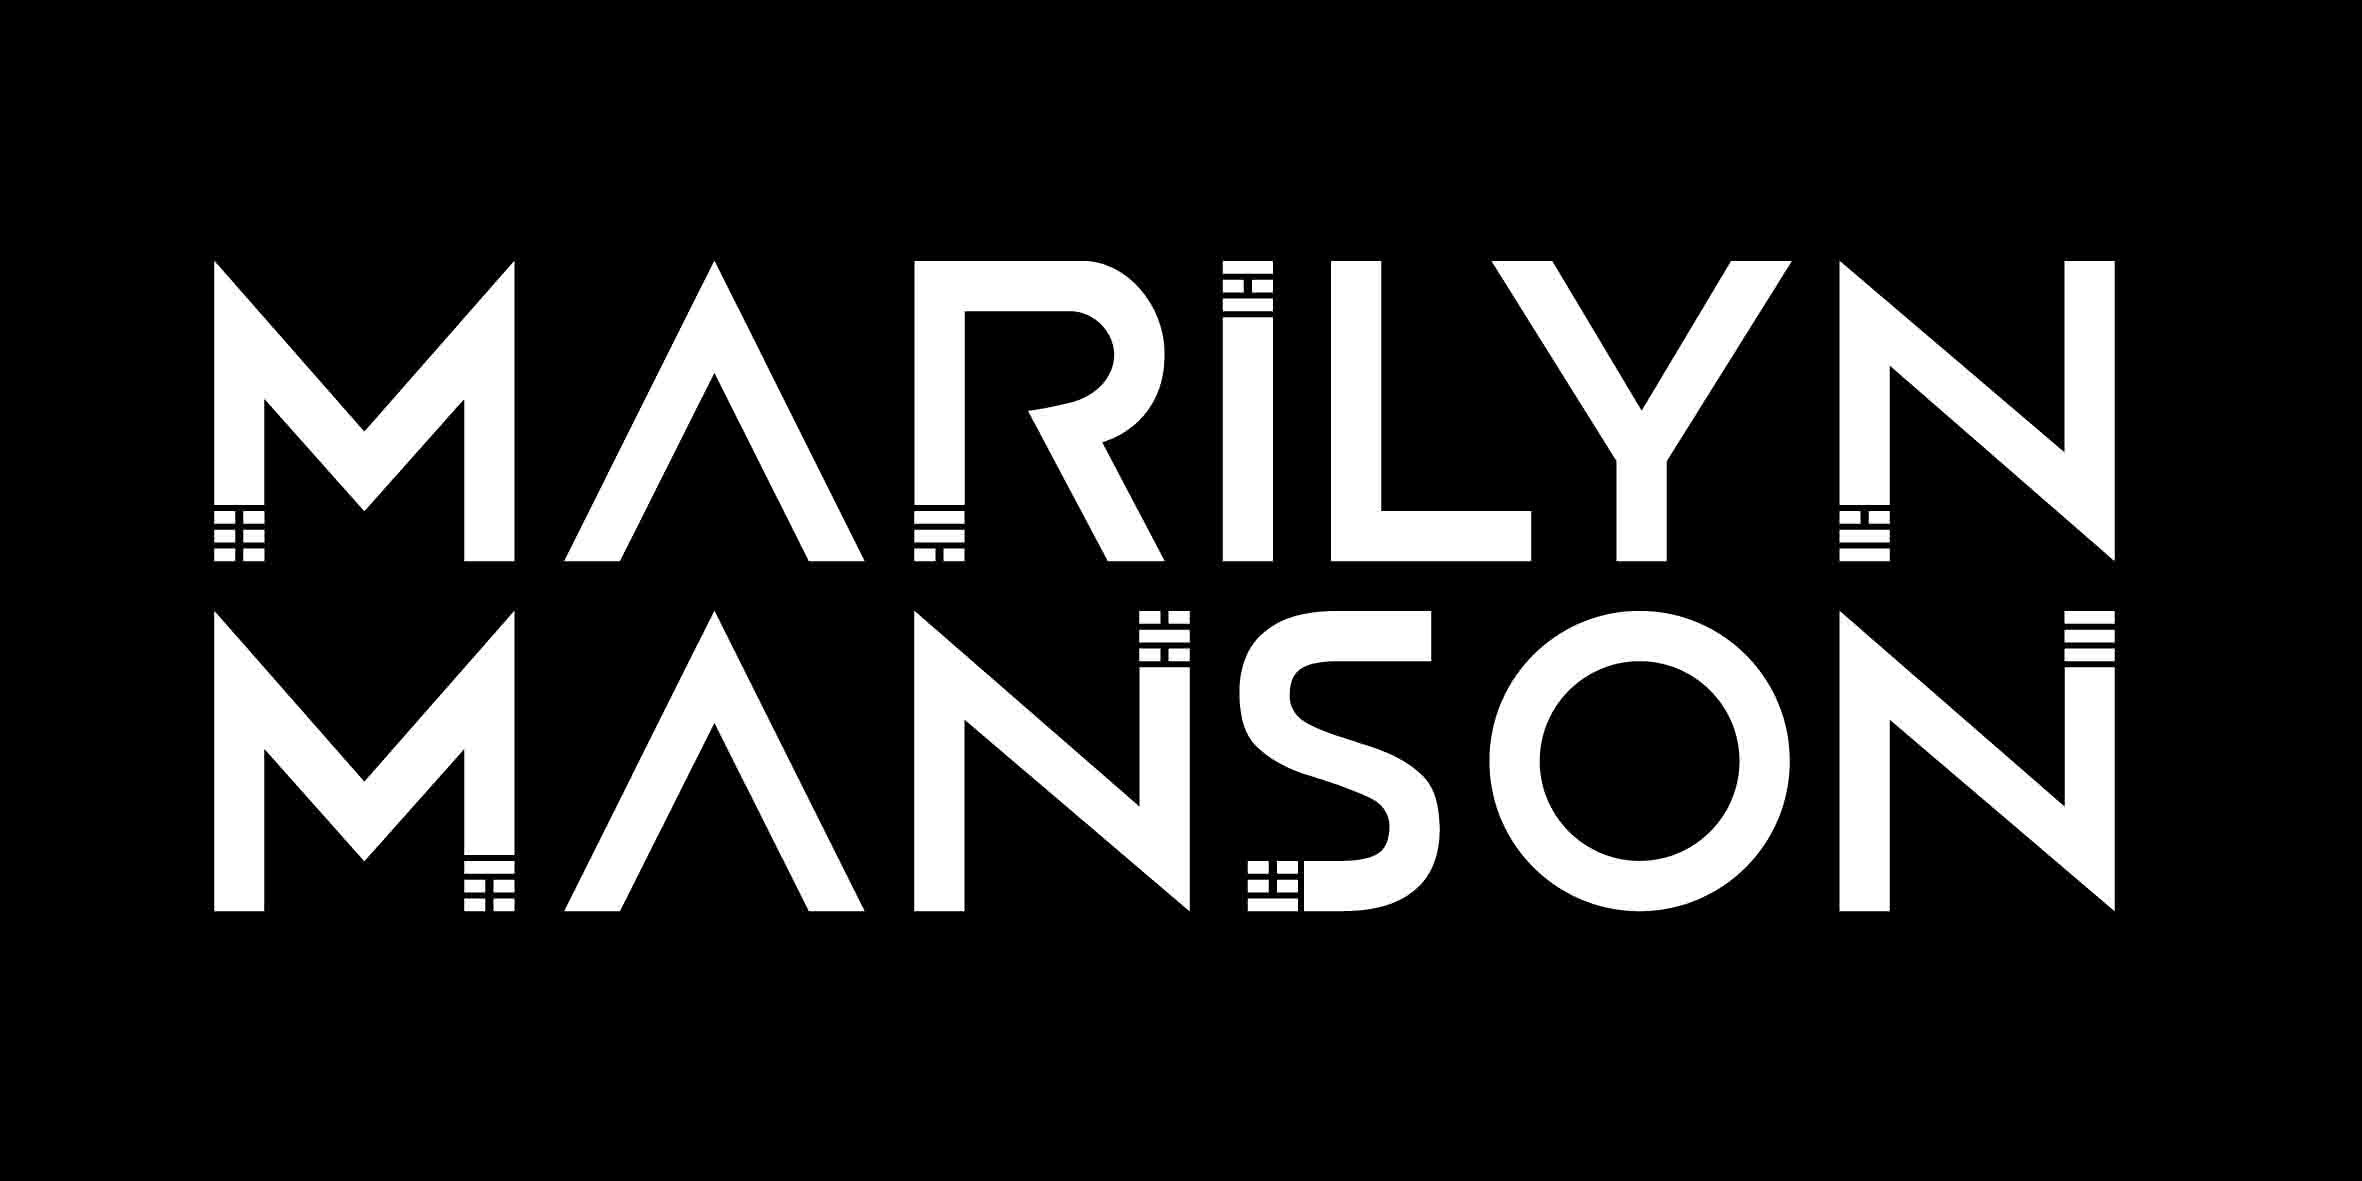 Marilyn Manson, Typography, Black background, Monochrome, Music, Simple background Wallpaper